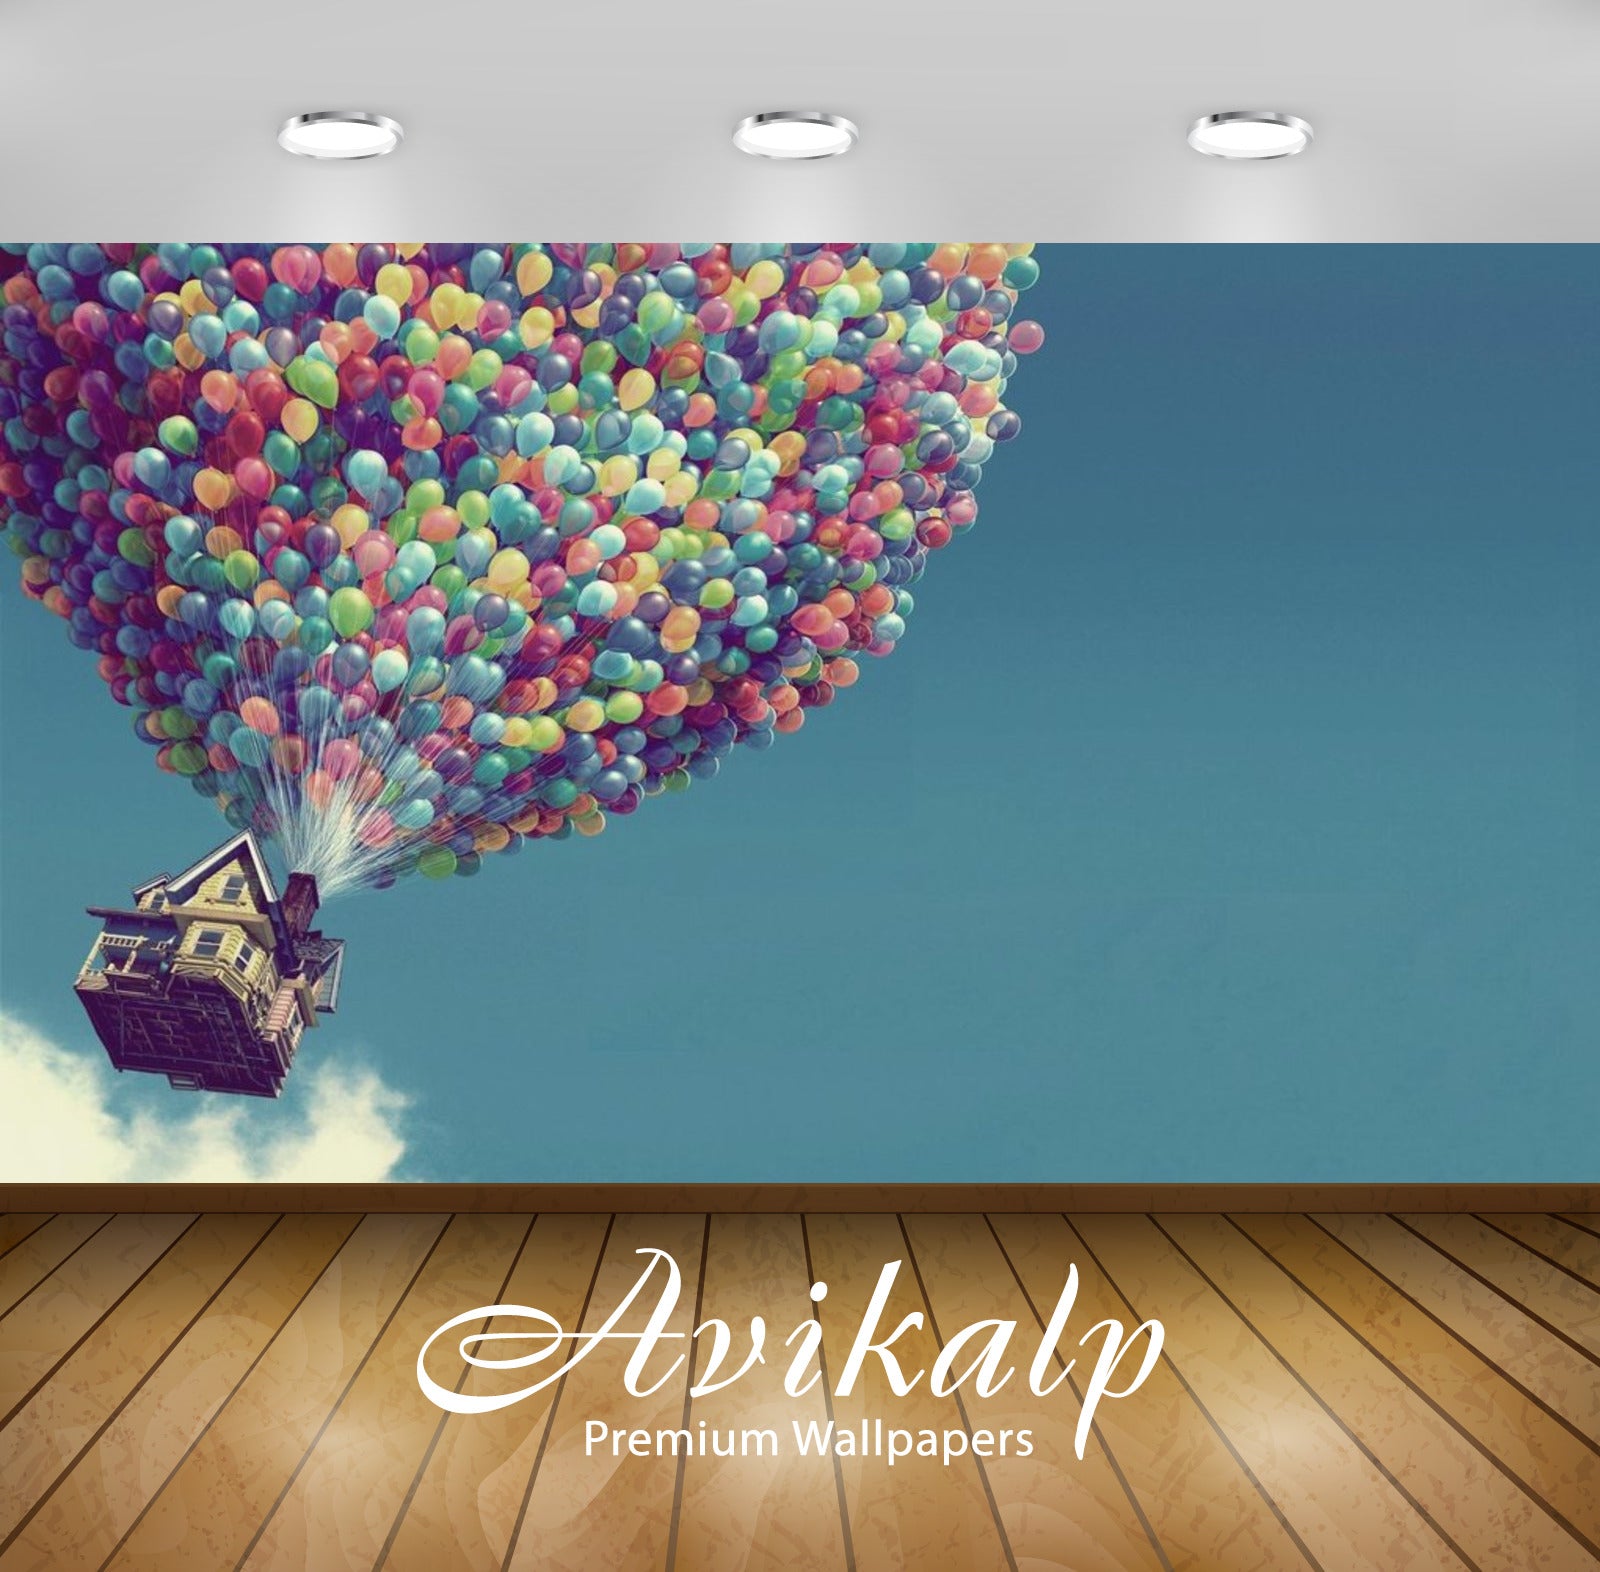 Avikalp Exclusive Air Baloon House AWI1062 HD Wallpapers for Living room, Hall, Kids Room, Kitchen,